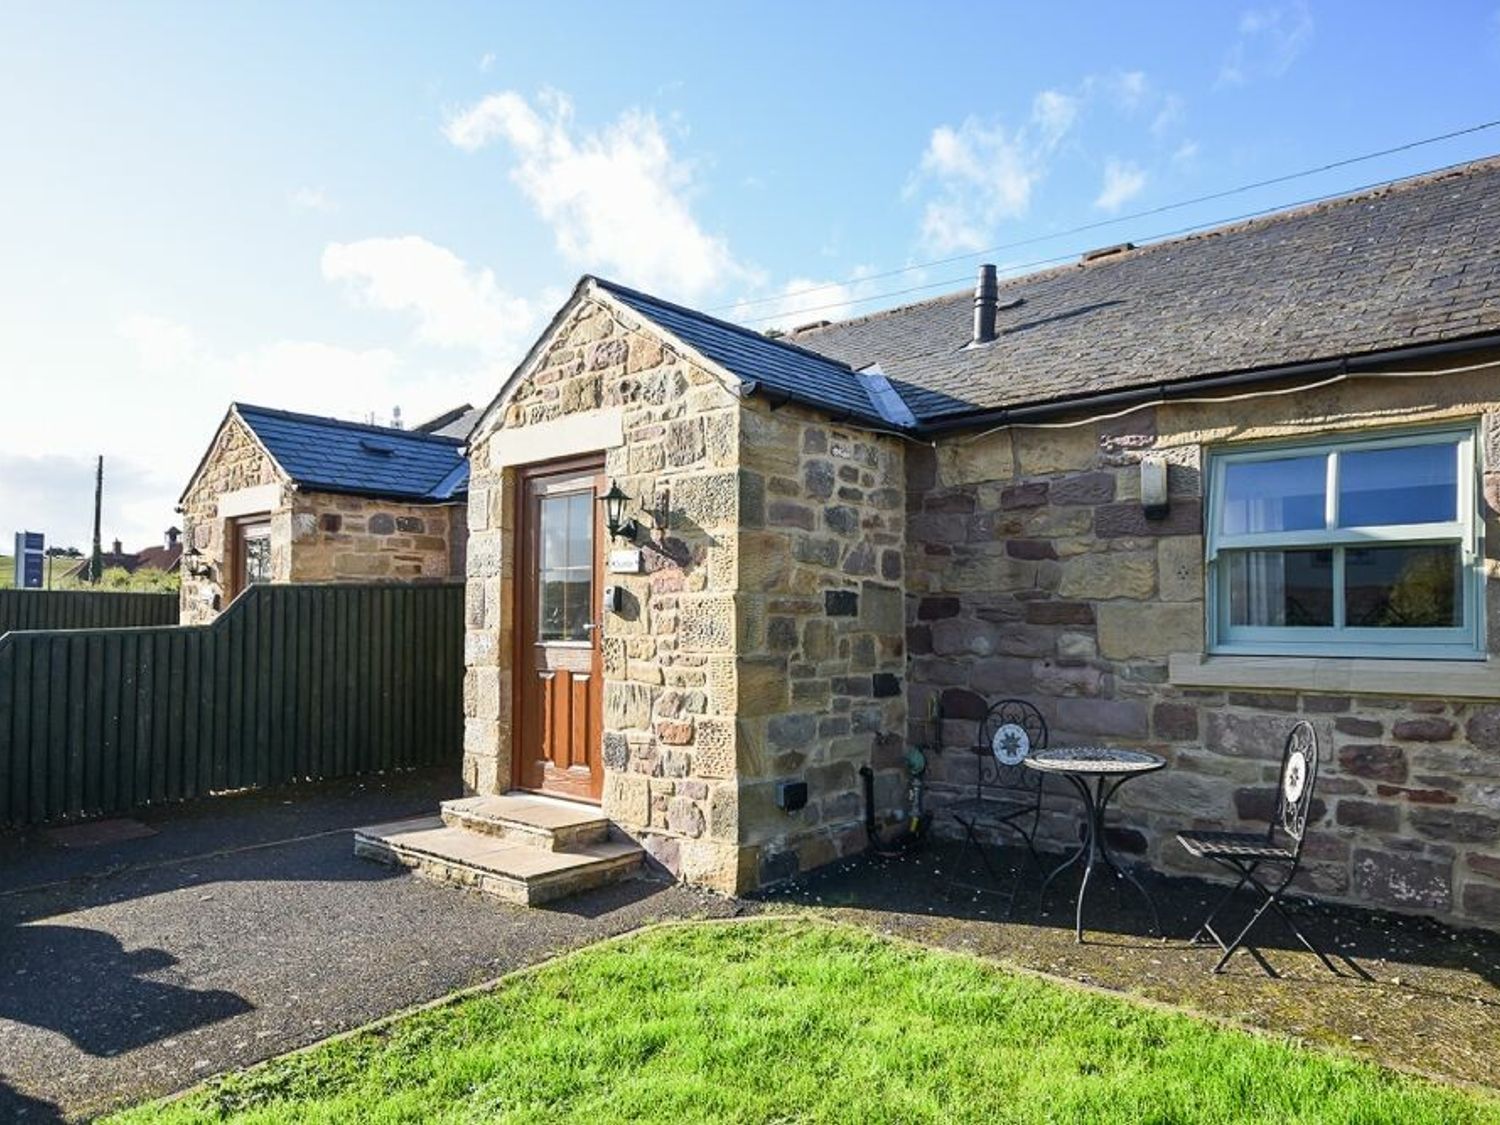 Dunlin Cottage - Lucker Steadings - Northumberland - 1121862 - photo 1